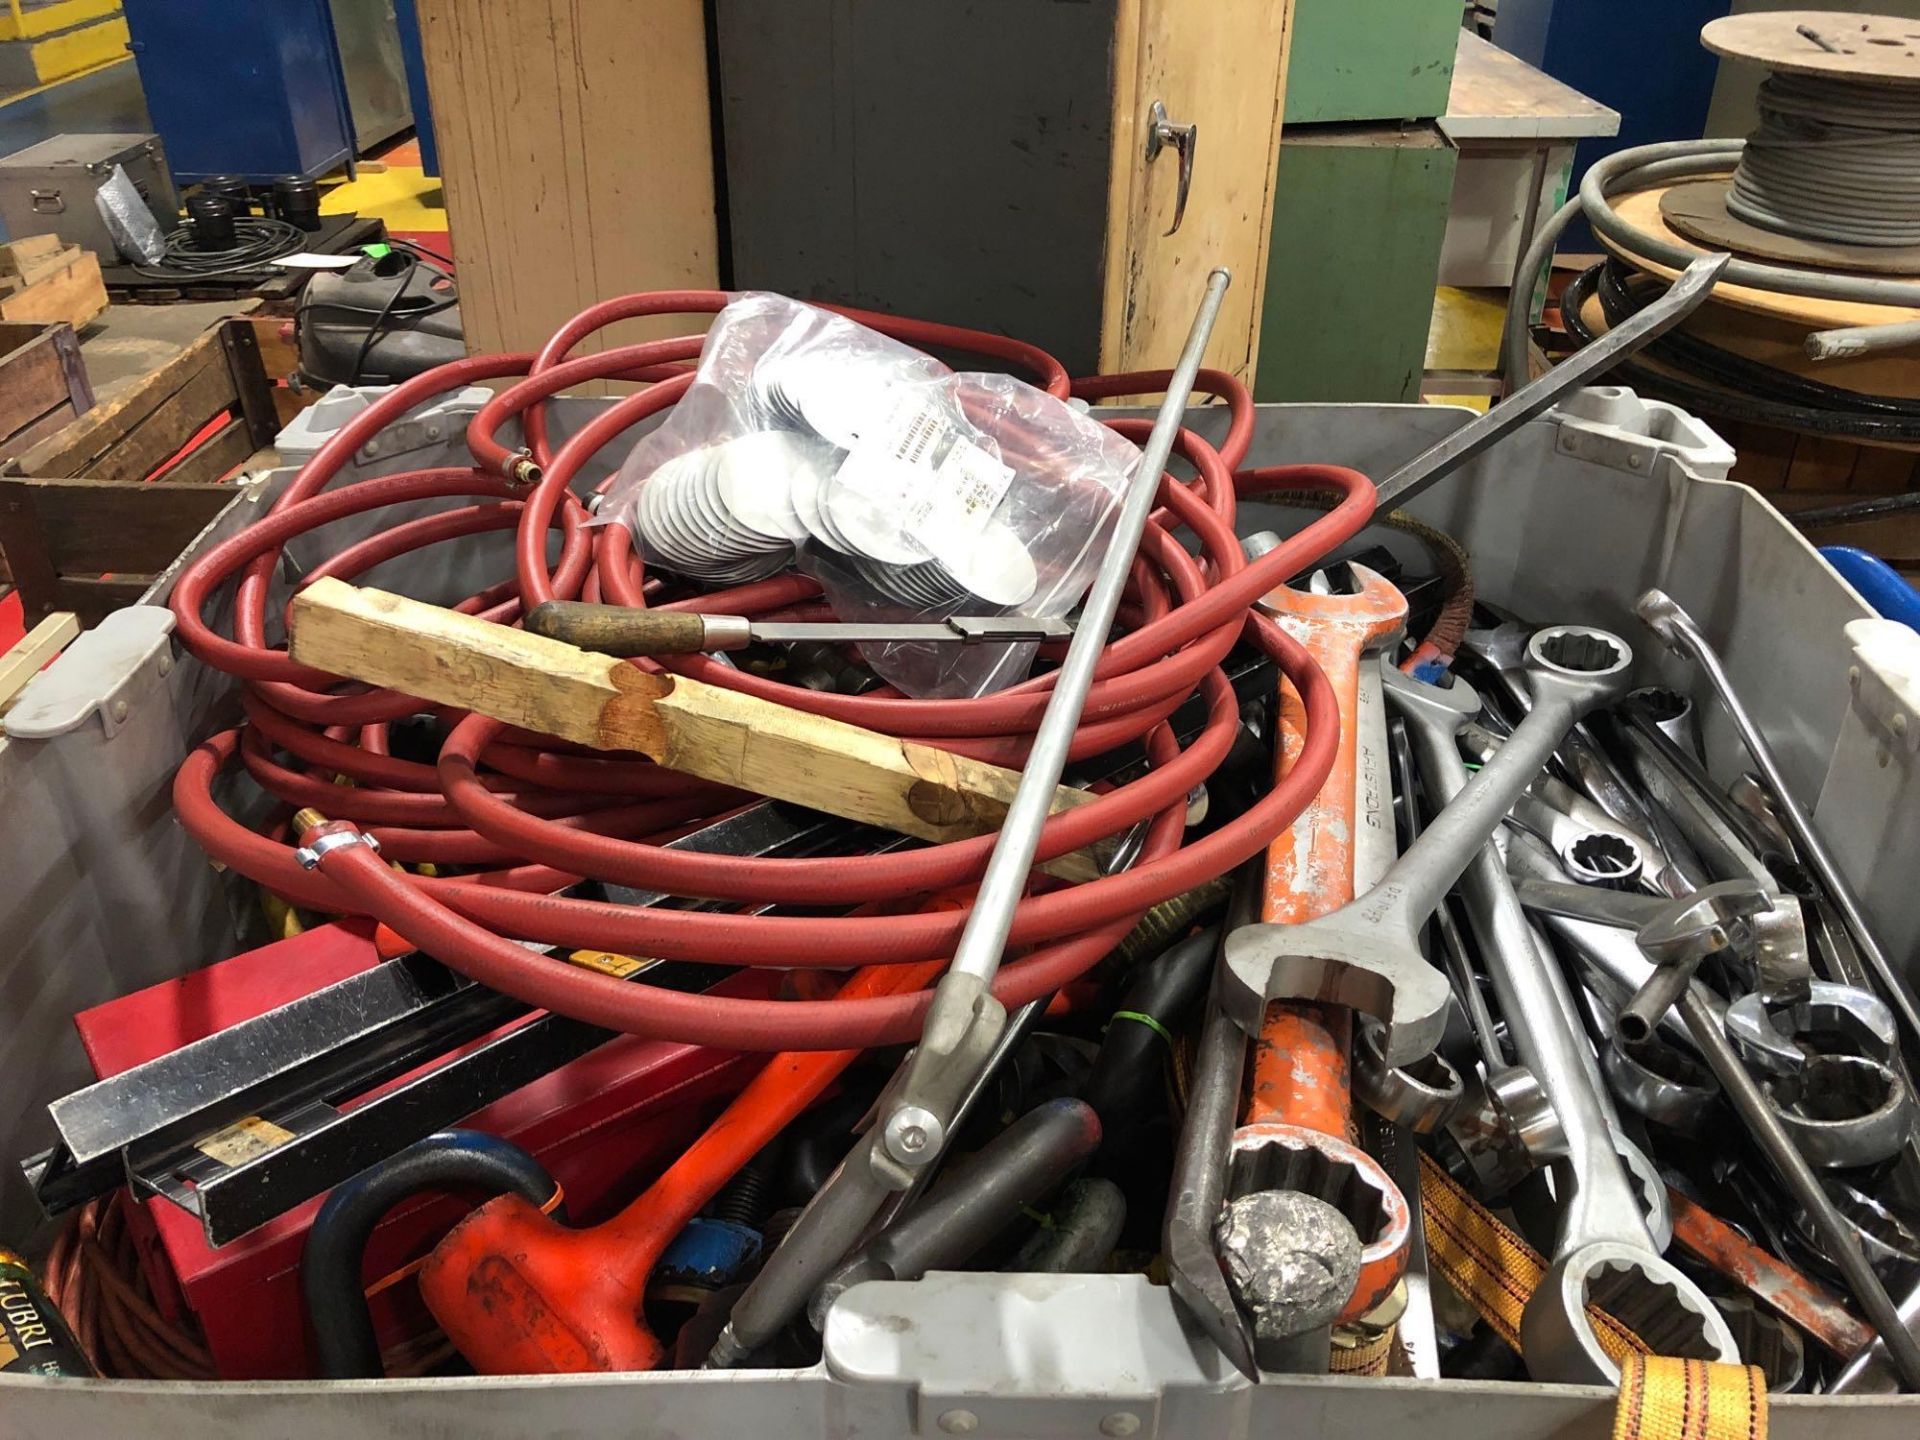 Lot of Wrenches, Shackles, Swivel D-Rings, Hose, Levels & Misc w/ Plastic Tote - Image 3 of 3